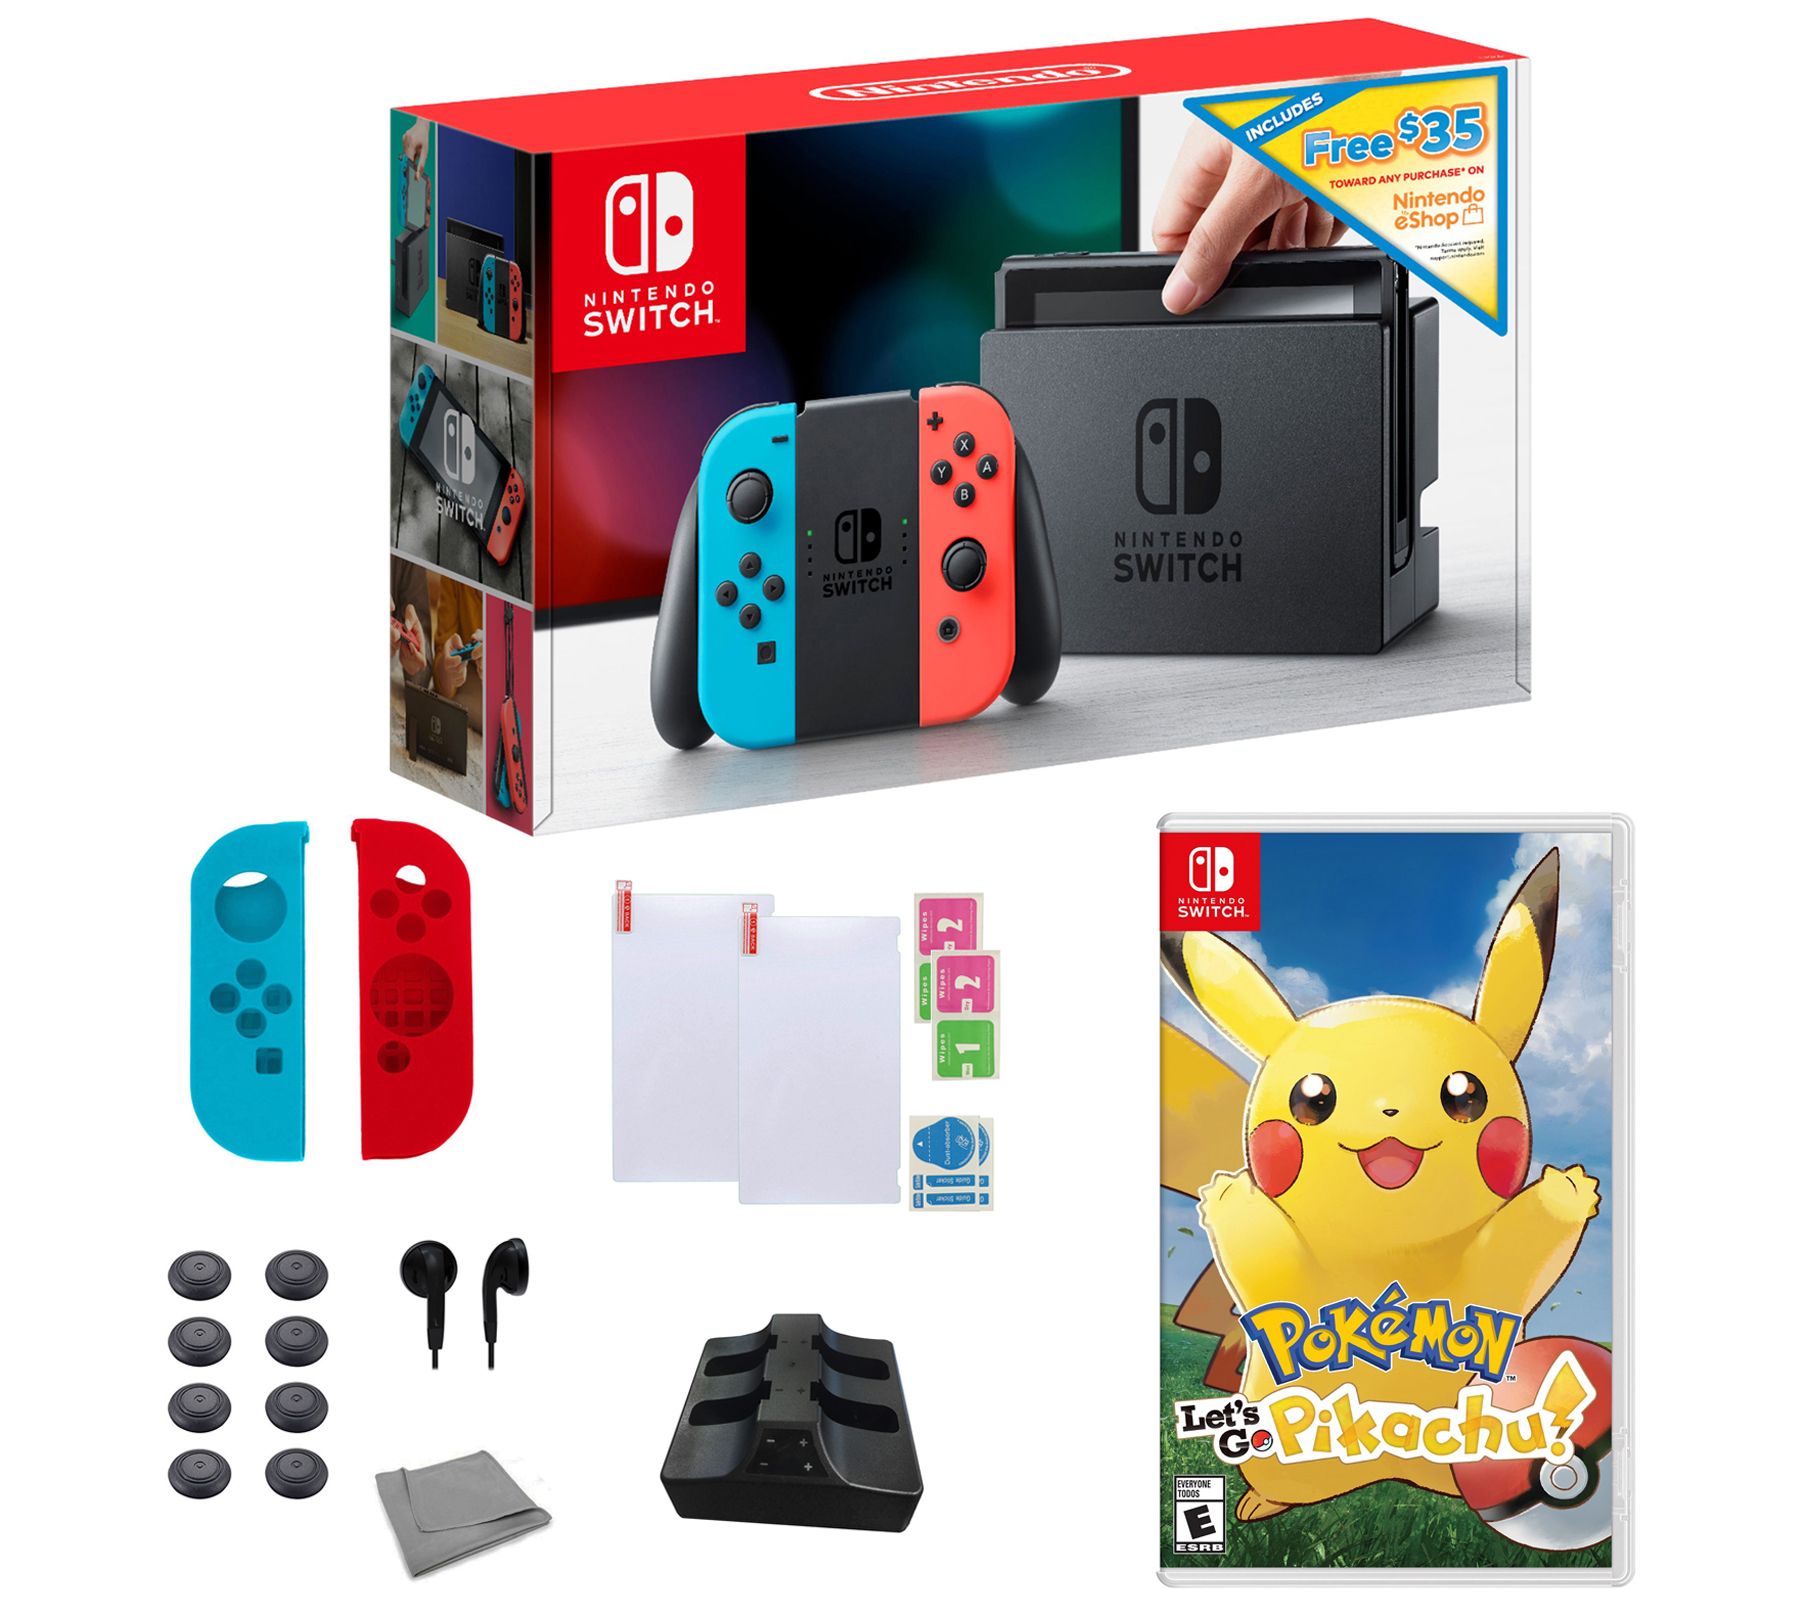 Buy Puzzle For Pokemon Let's Go Pikachu Game Xbox One Compare Prices